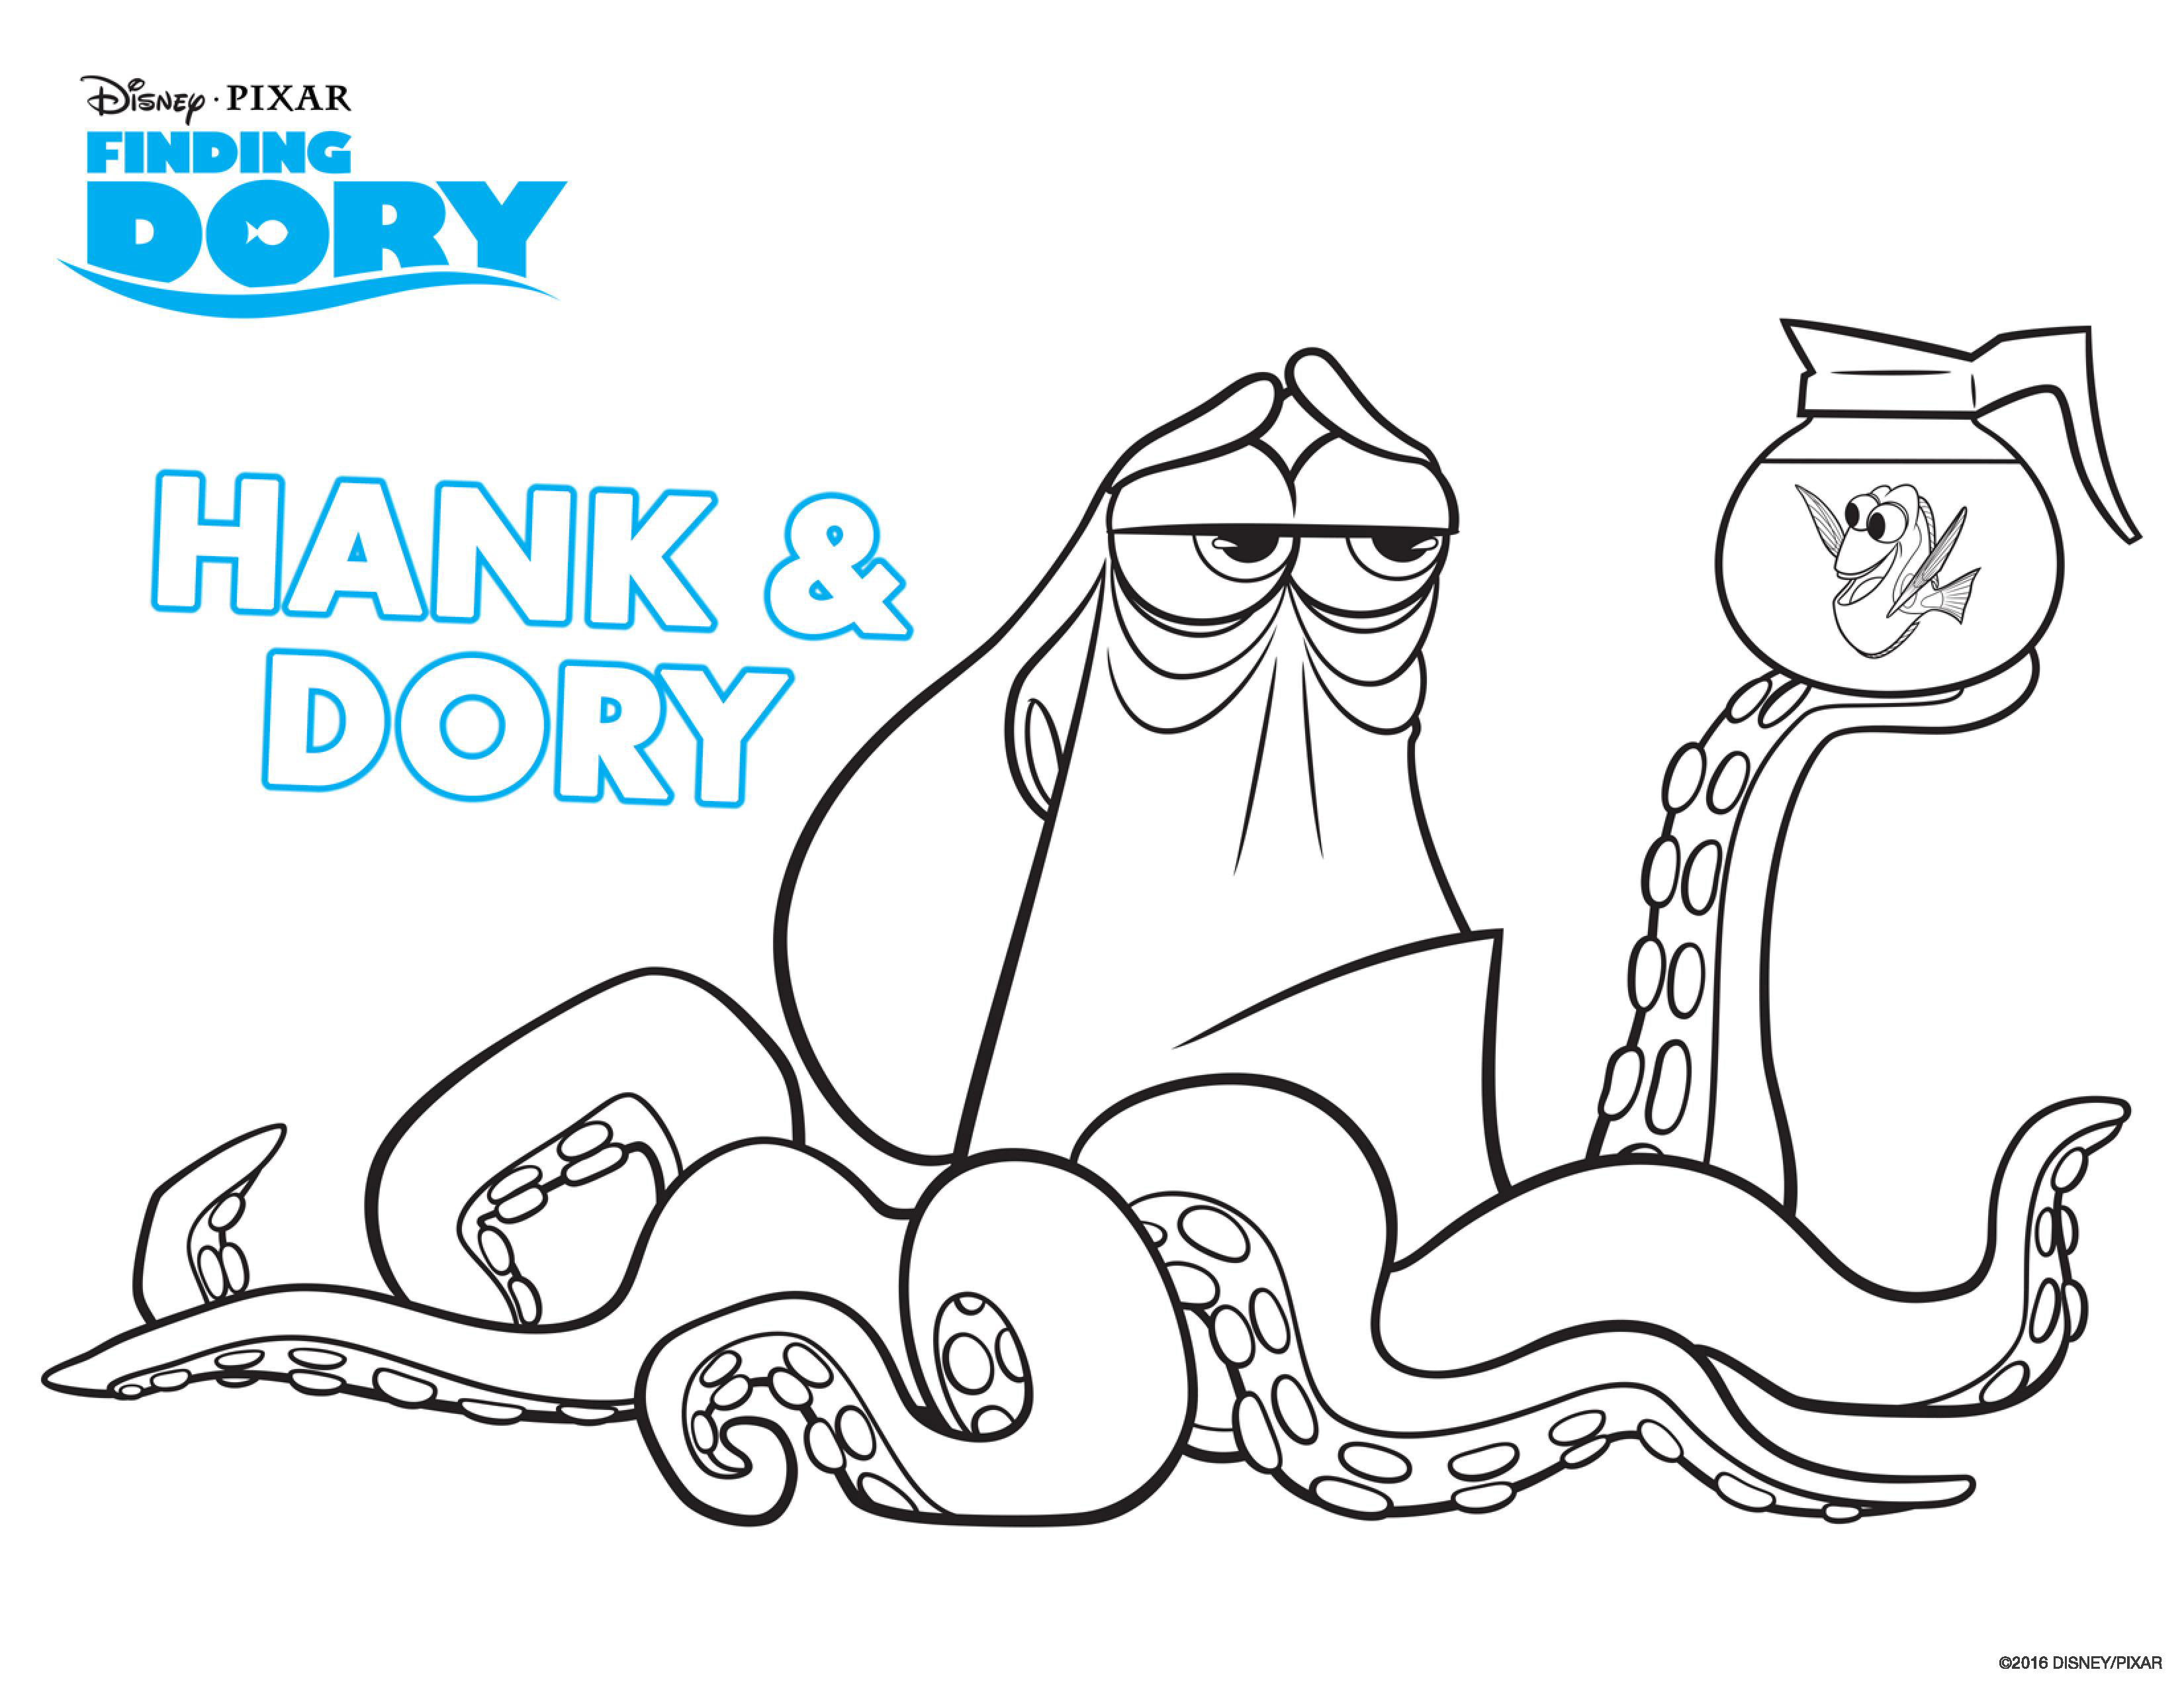 Finding Nemo Characters Coloring Pages Finding Dory To Print Finding Dory Kids Coloring Pages